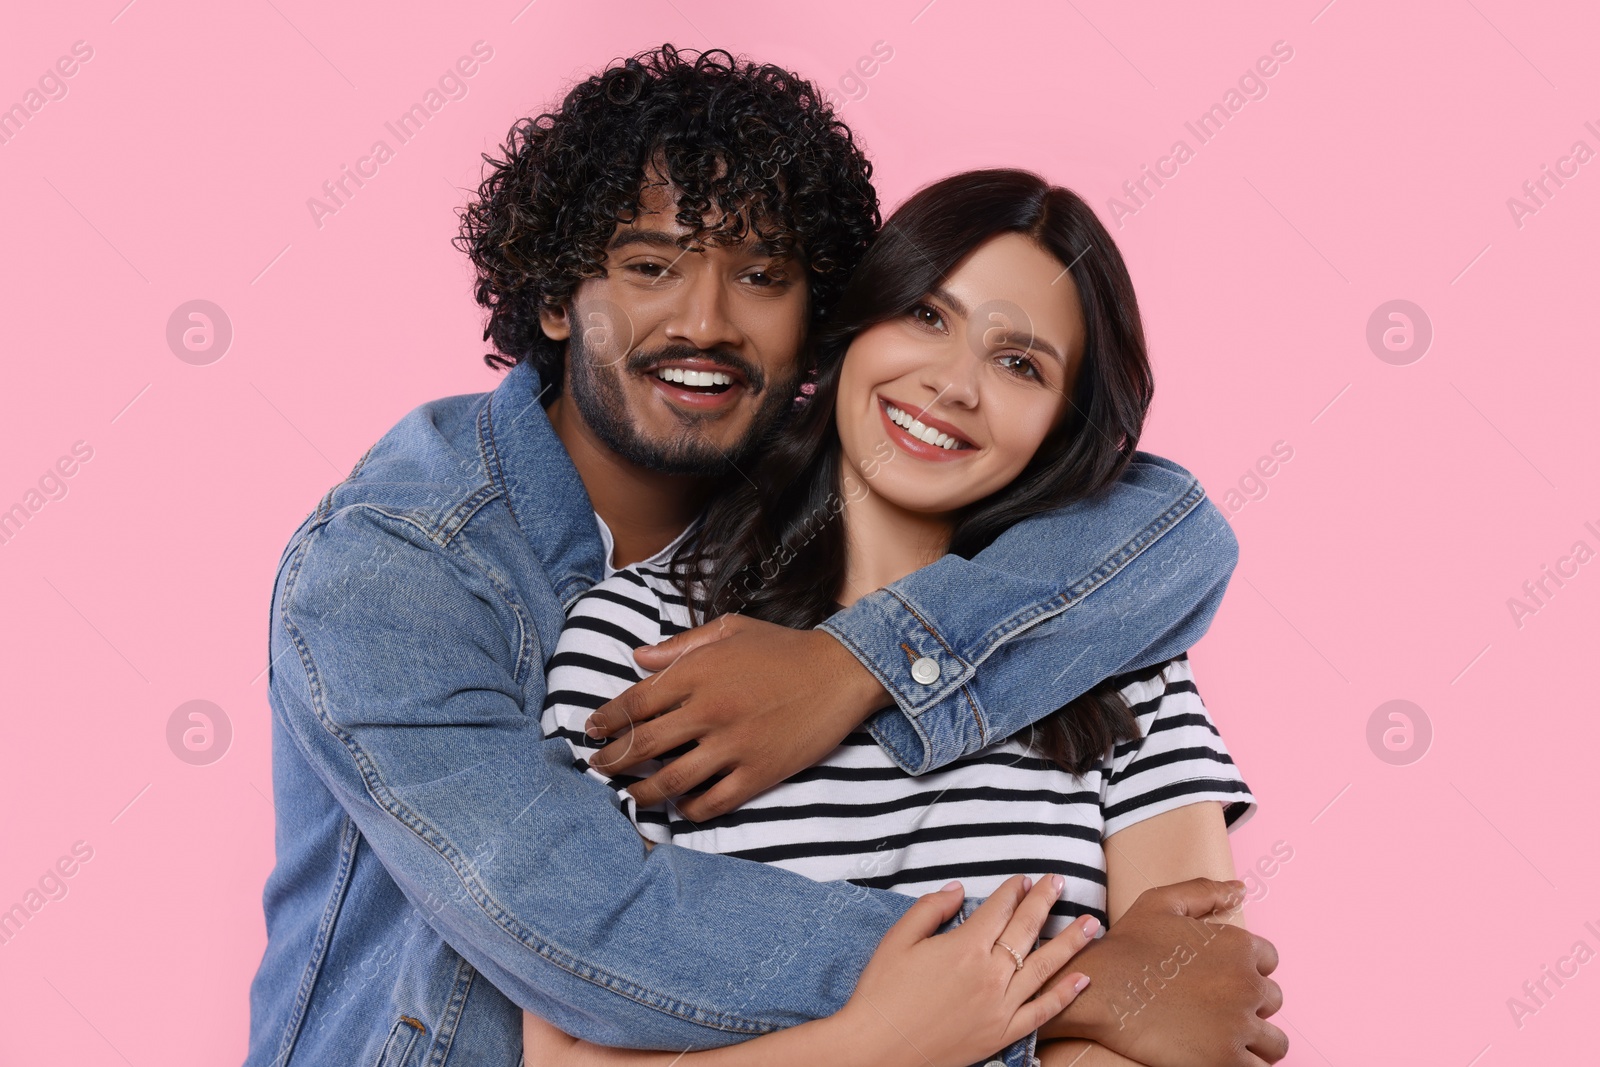 Photo of International dating. Lovely couple hugging on pink background